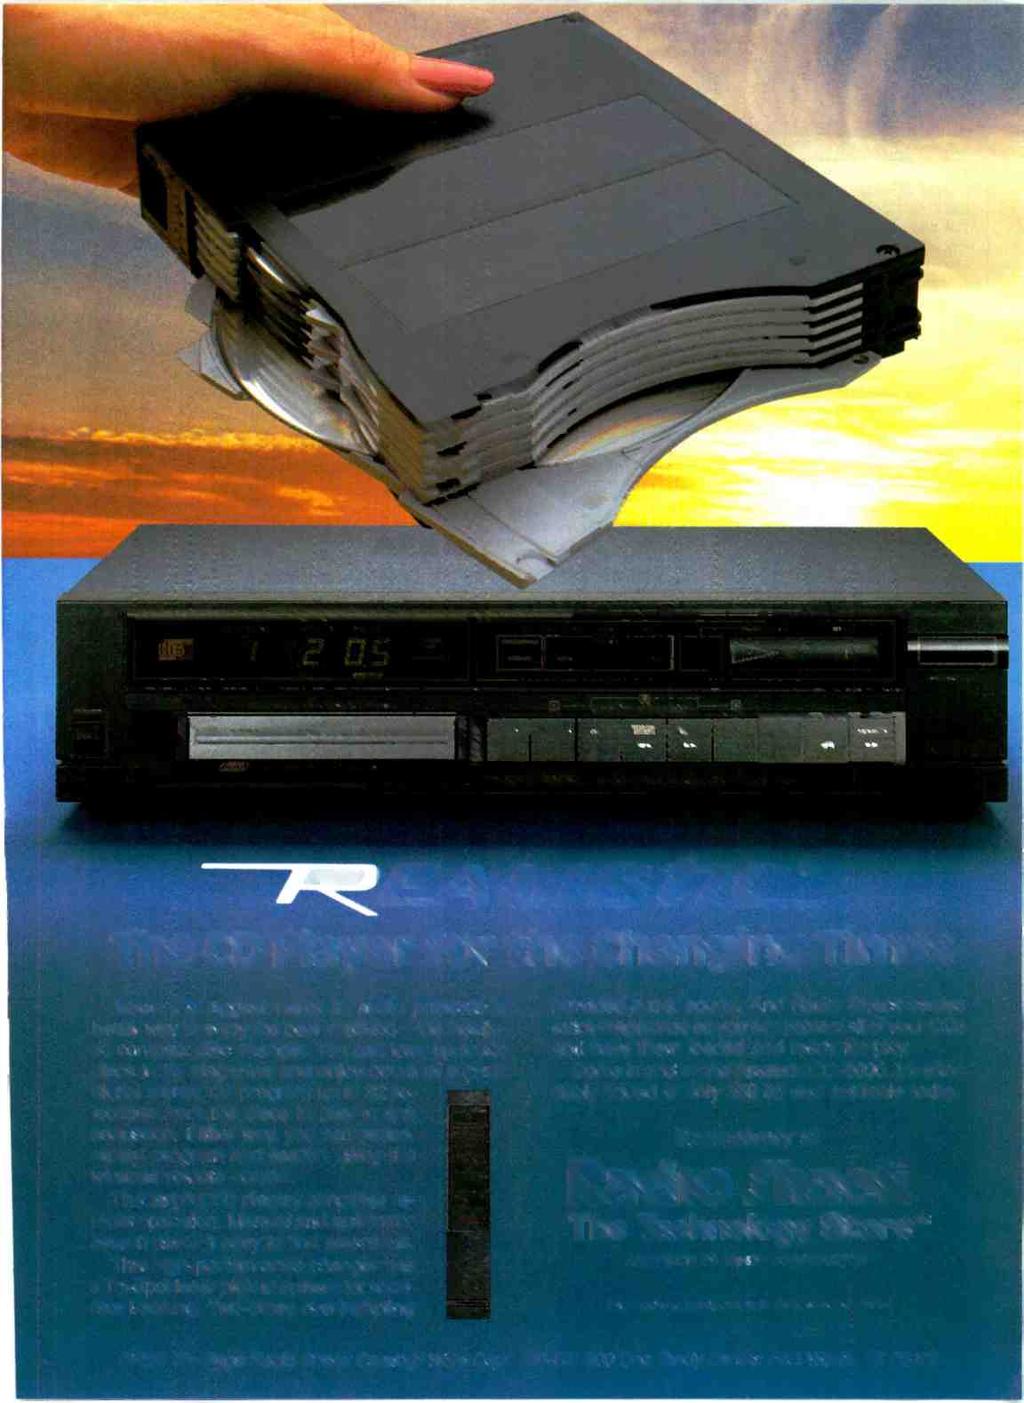 AIFFEA at. als The Cb Player for the Changing Times America's biggest name in audio presents a better way to enjoy the best in sound-the Realiistic compact disc changer.